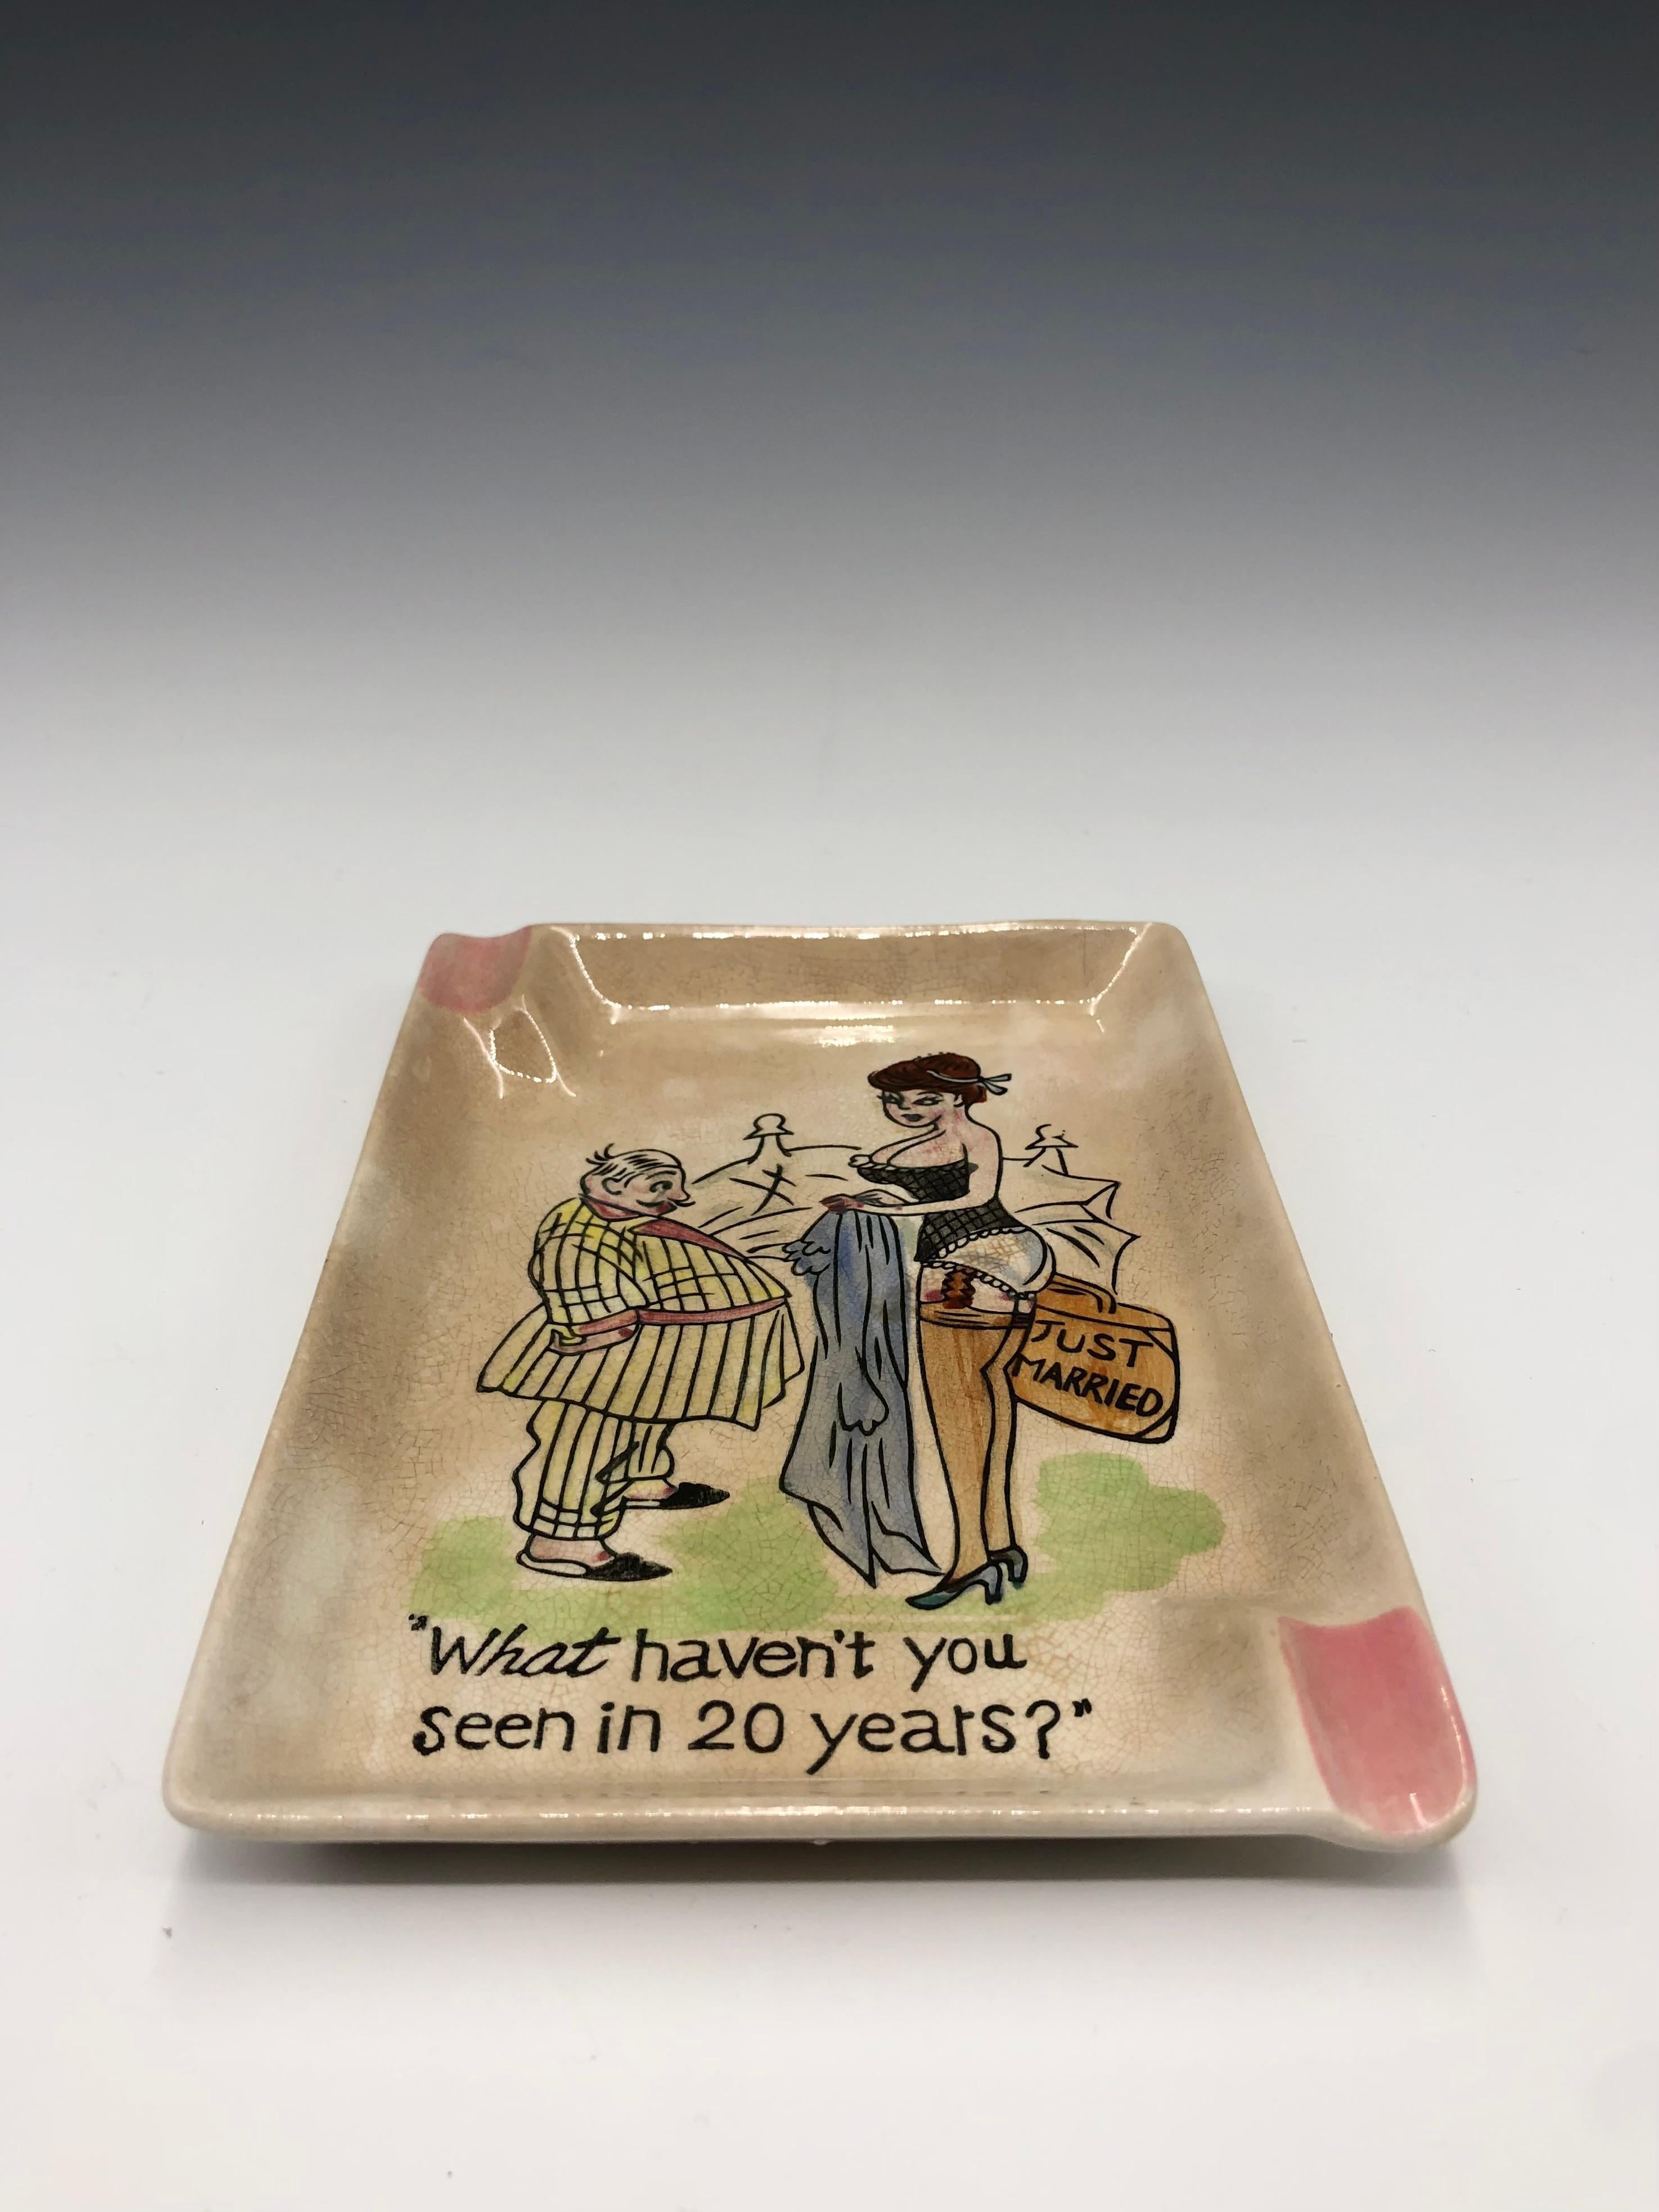 A charming, kitsch comical post-war porcelain ashtray or catchall, vide-poche. Made in Japan during the late 1940s or early 1950s. The original 